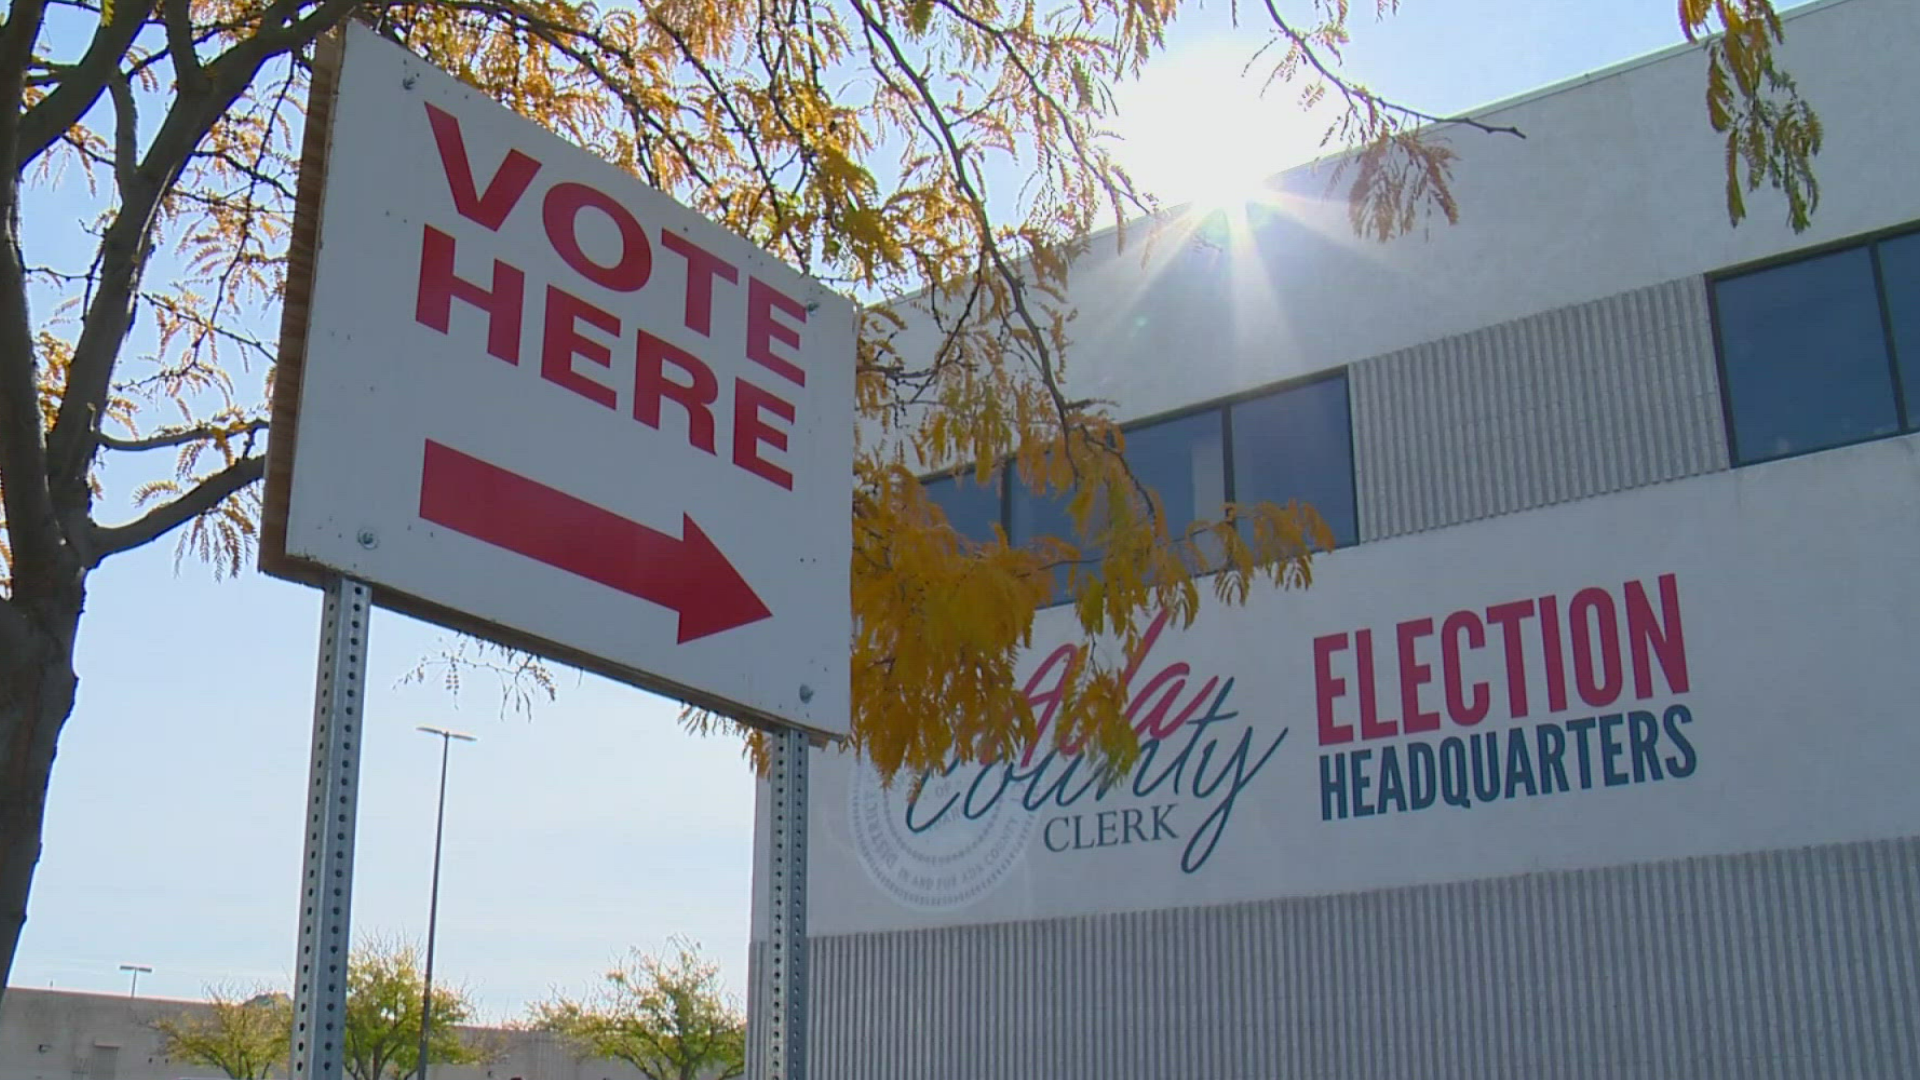 Early voting wrapped up Friday. Polls are open from 8 a.m.-8 p.m. on Tuesday.